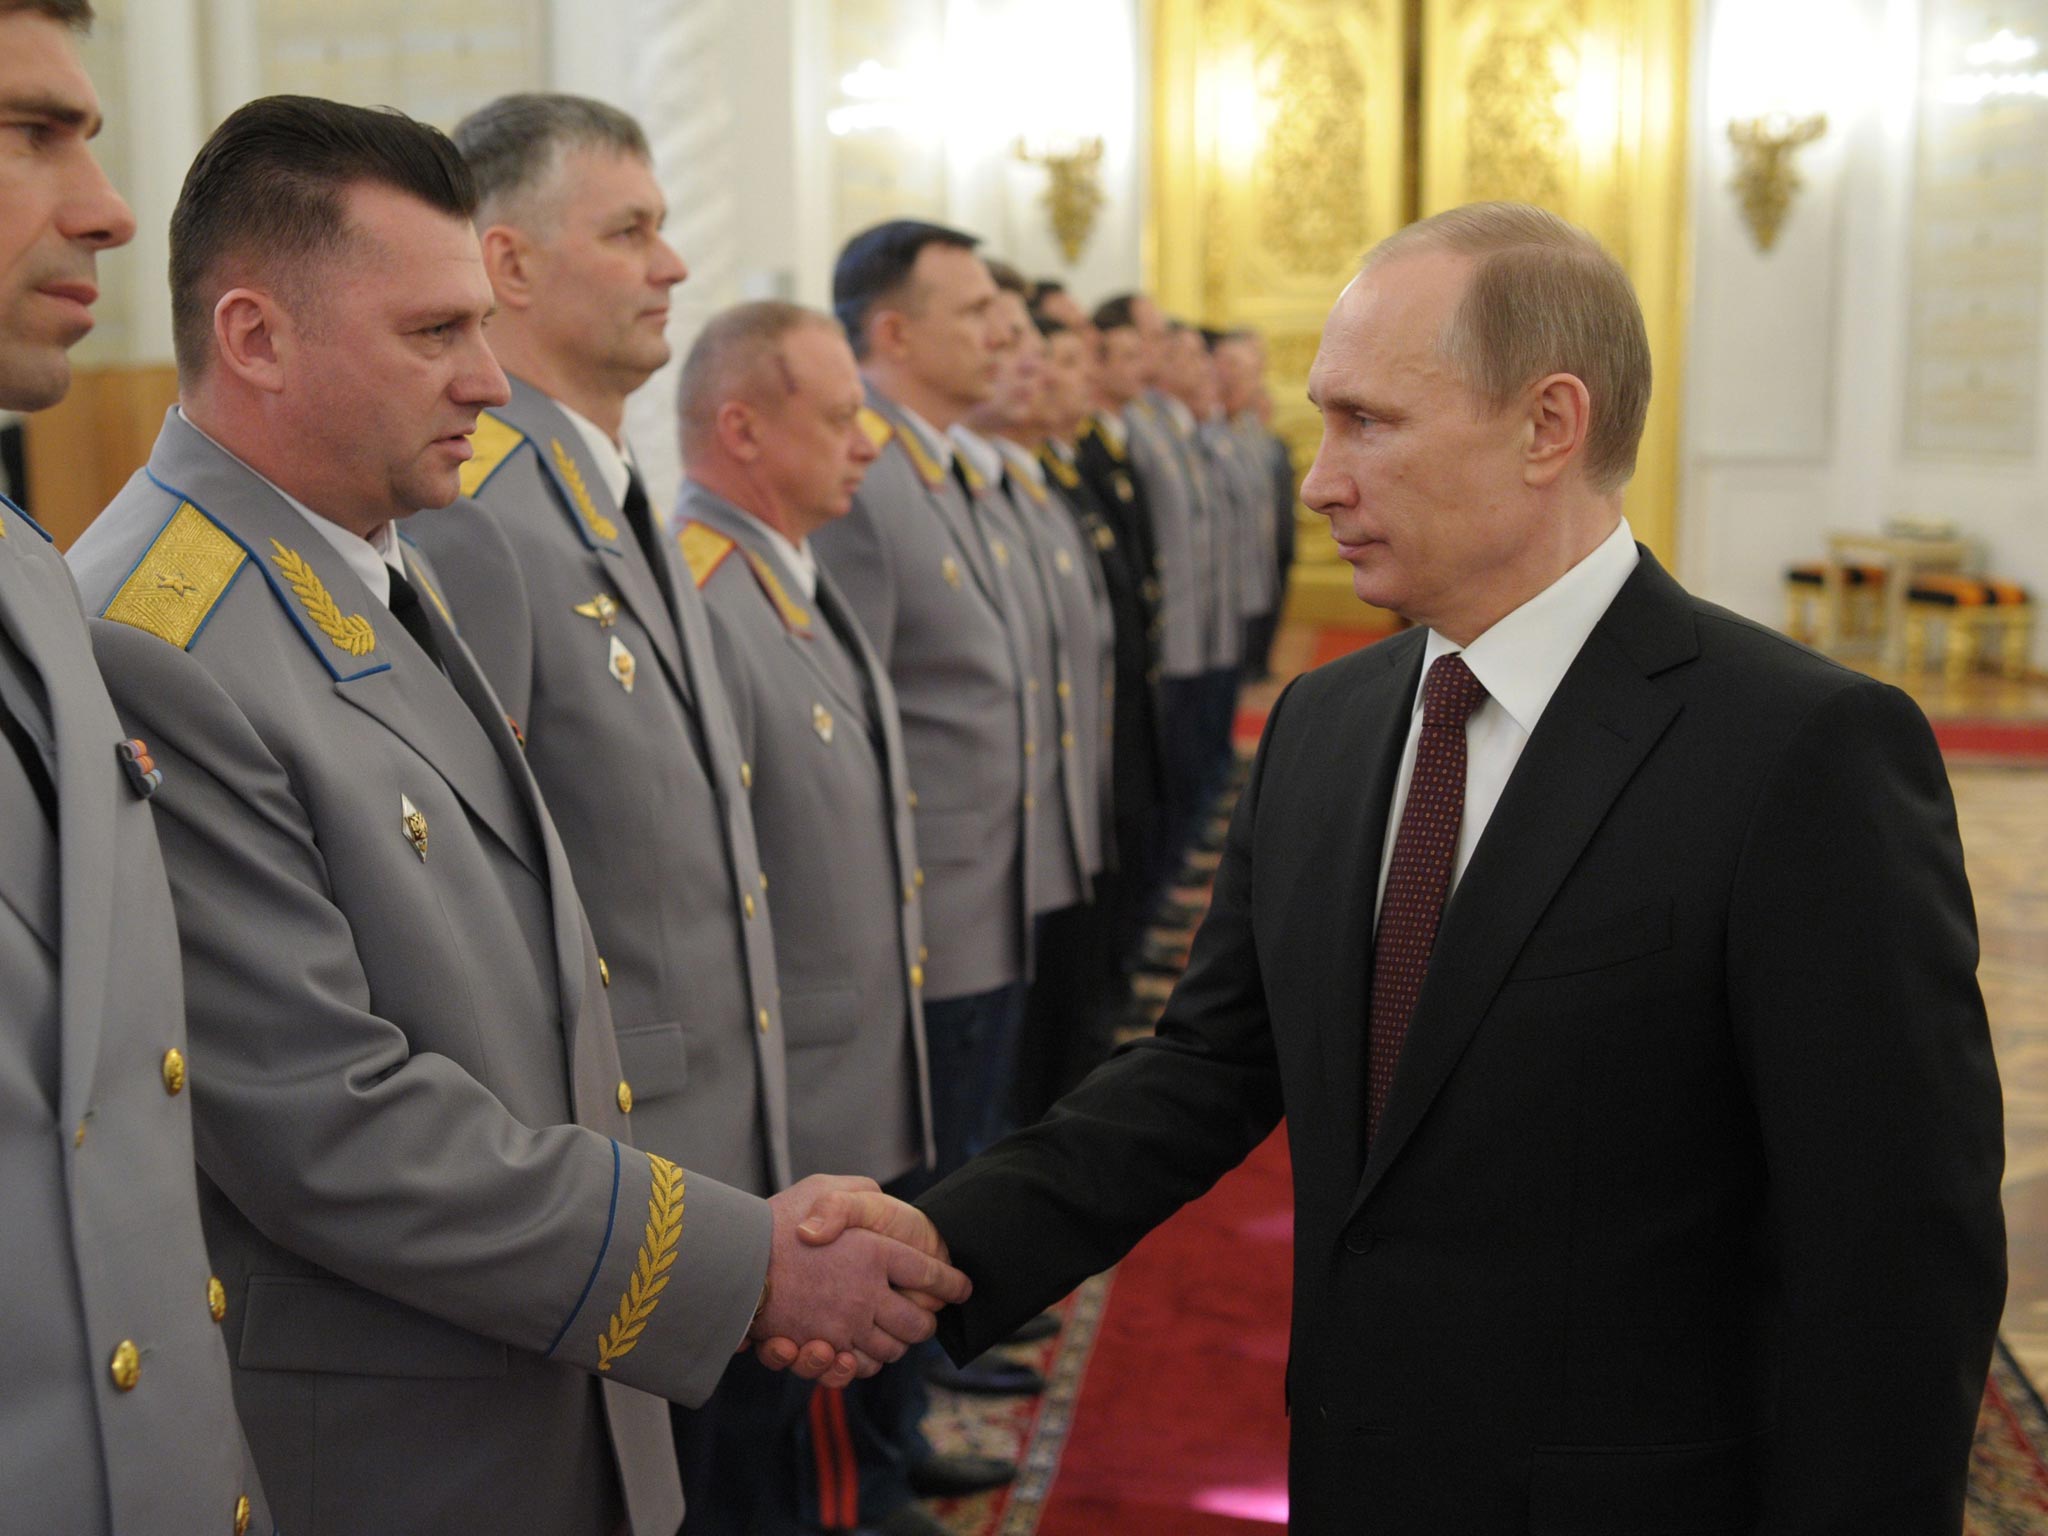 Vladimir Putin meets newly promoted officers yesterday from the Russian armed forces, which he praised for their role in Crimea